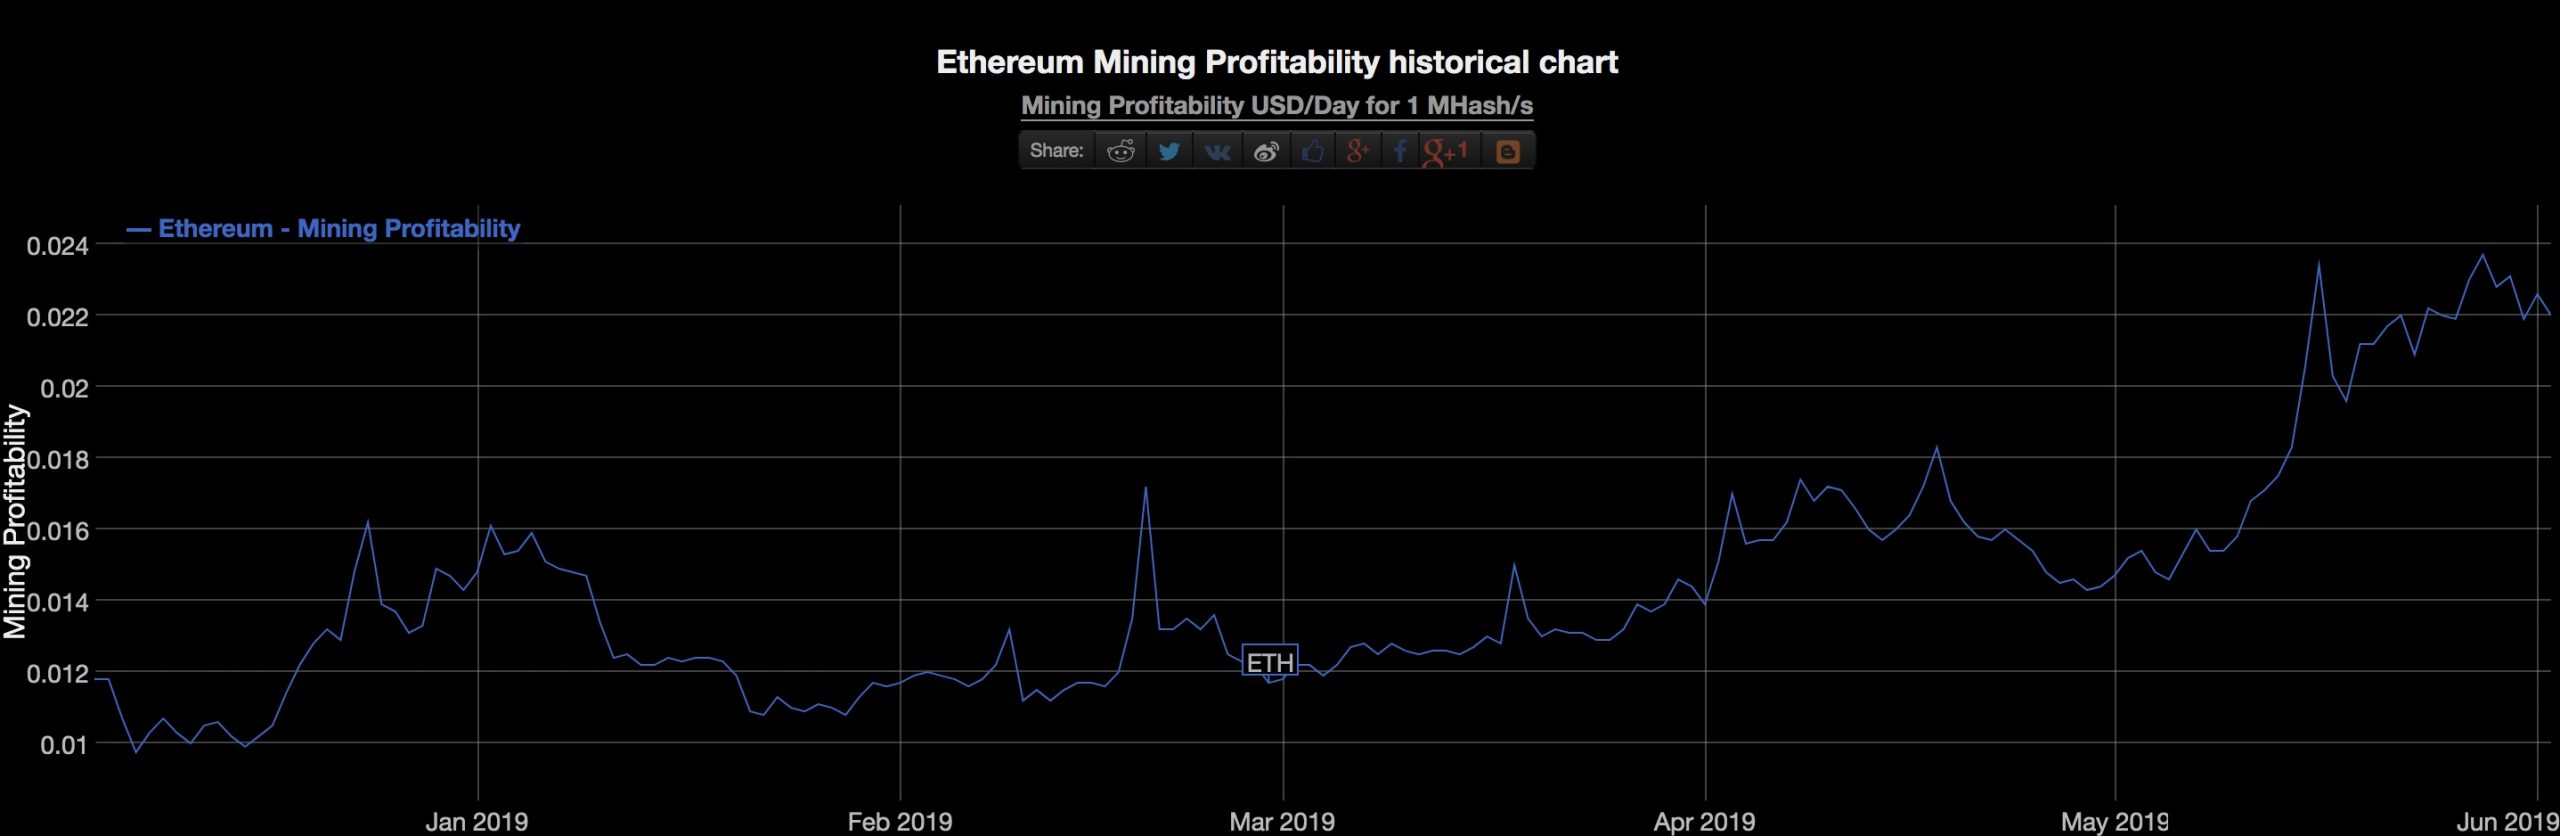 Eth mining is becoming profitable again